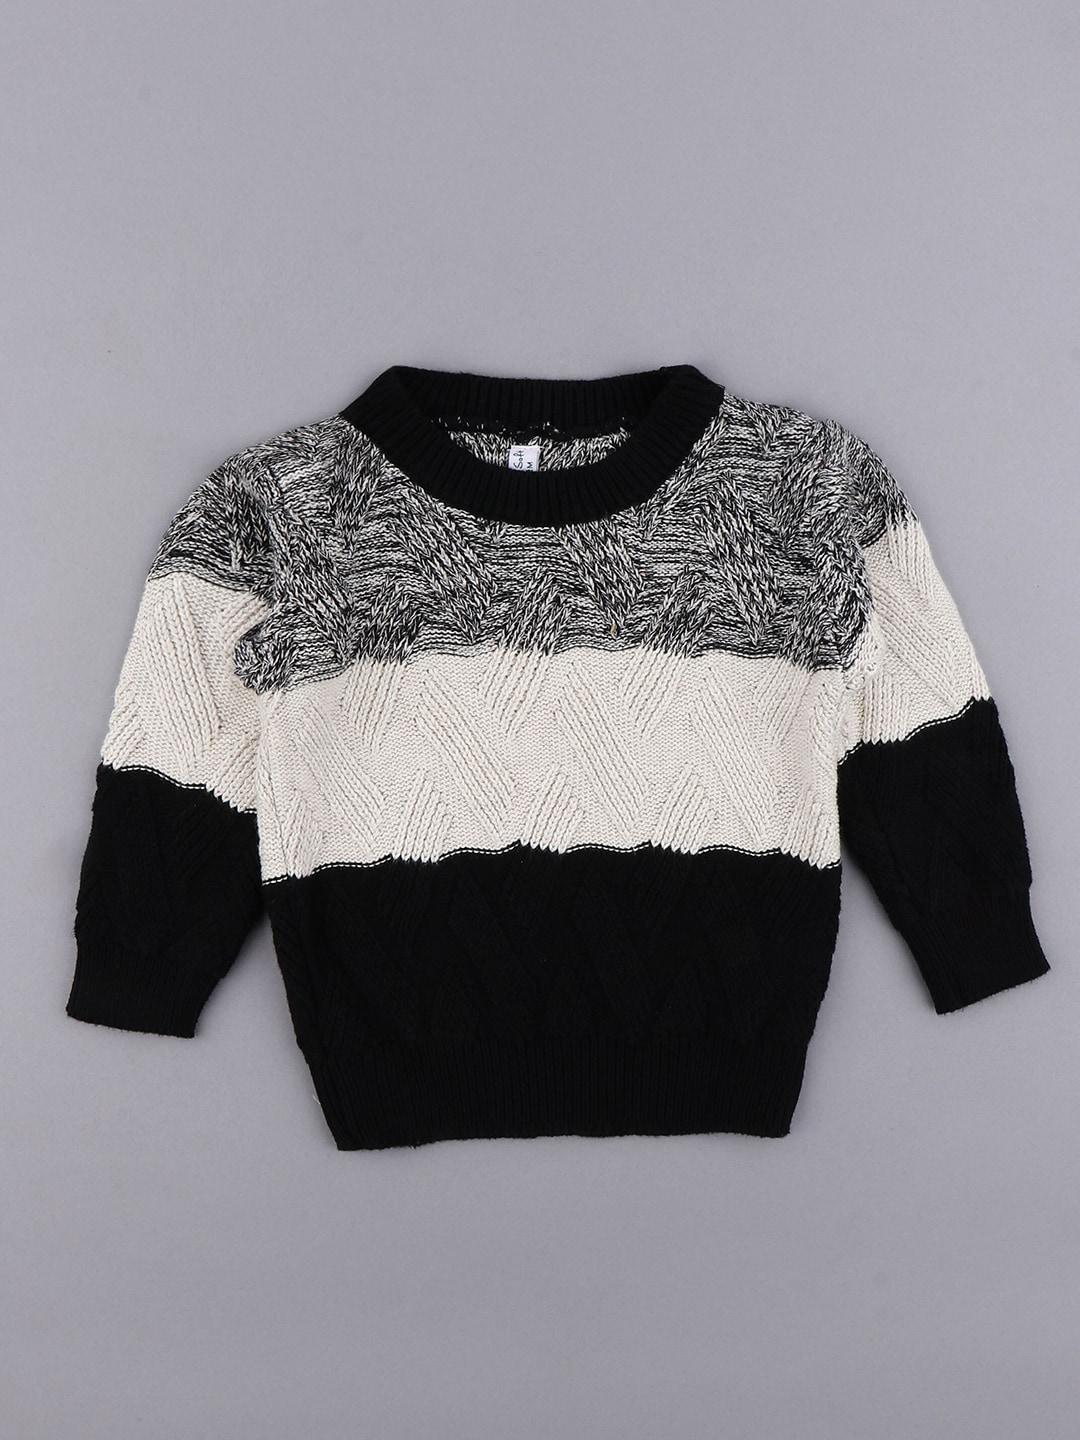 cot'n-soft-boys-colourblocked-woollen-pullover-sweater